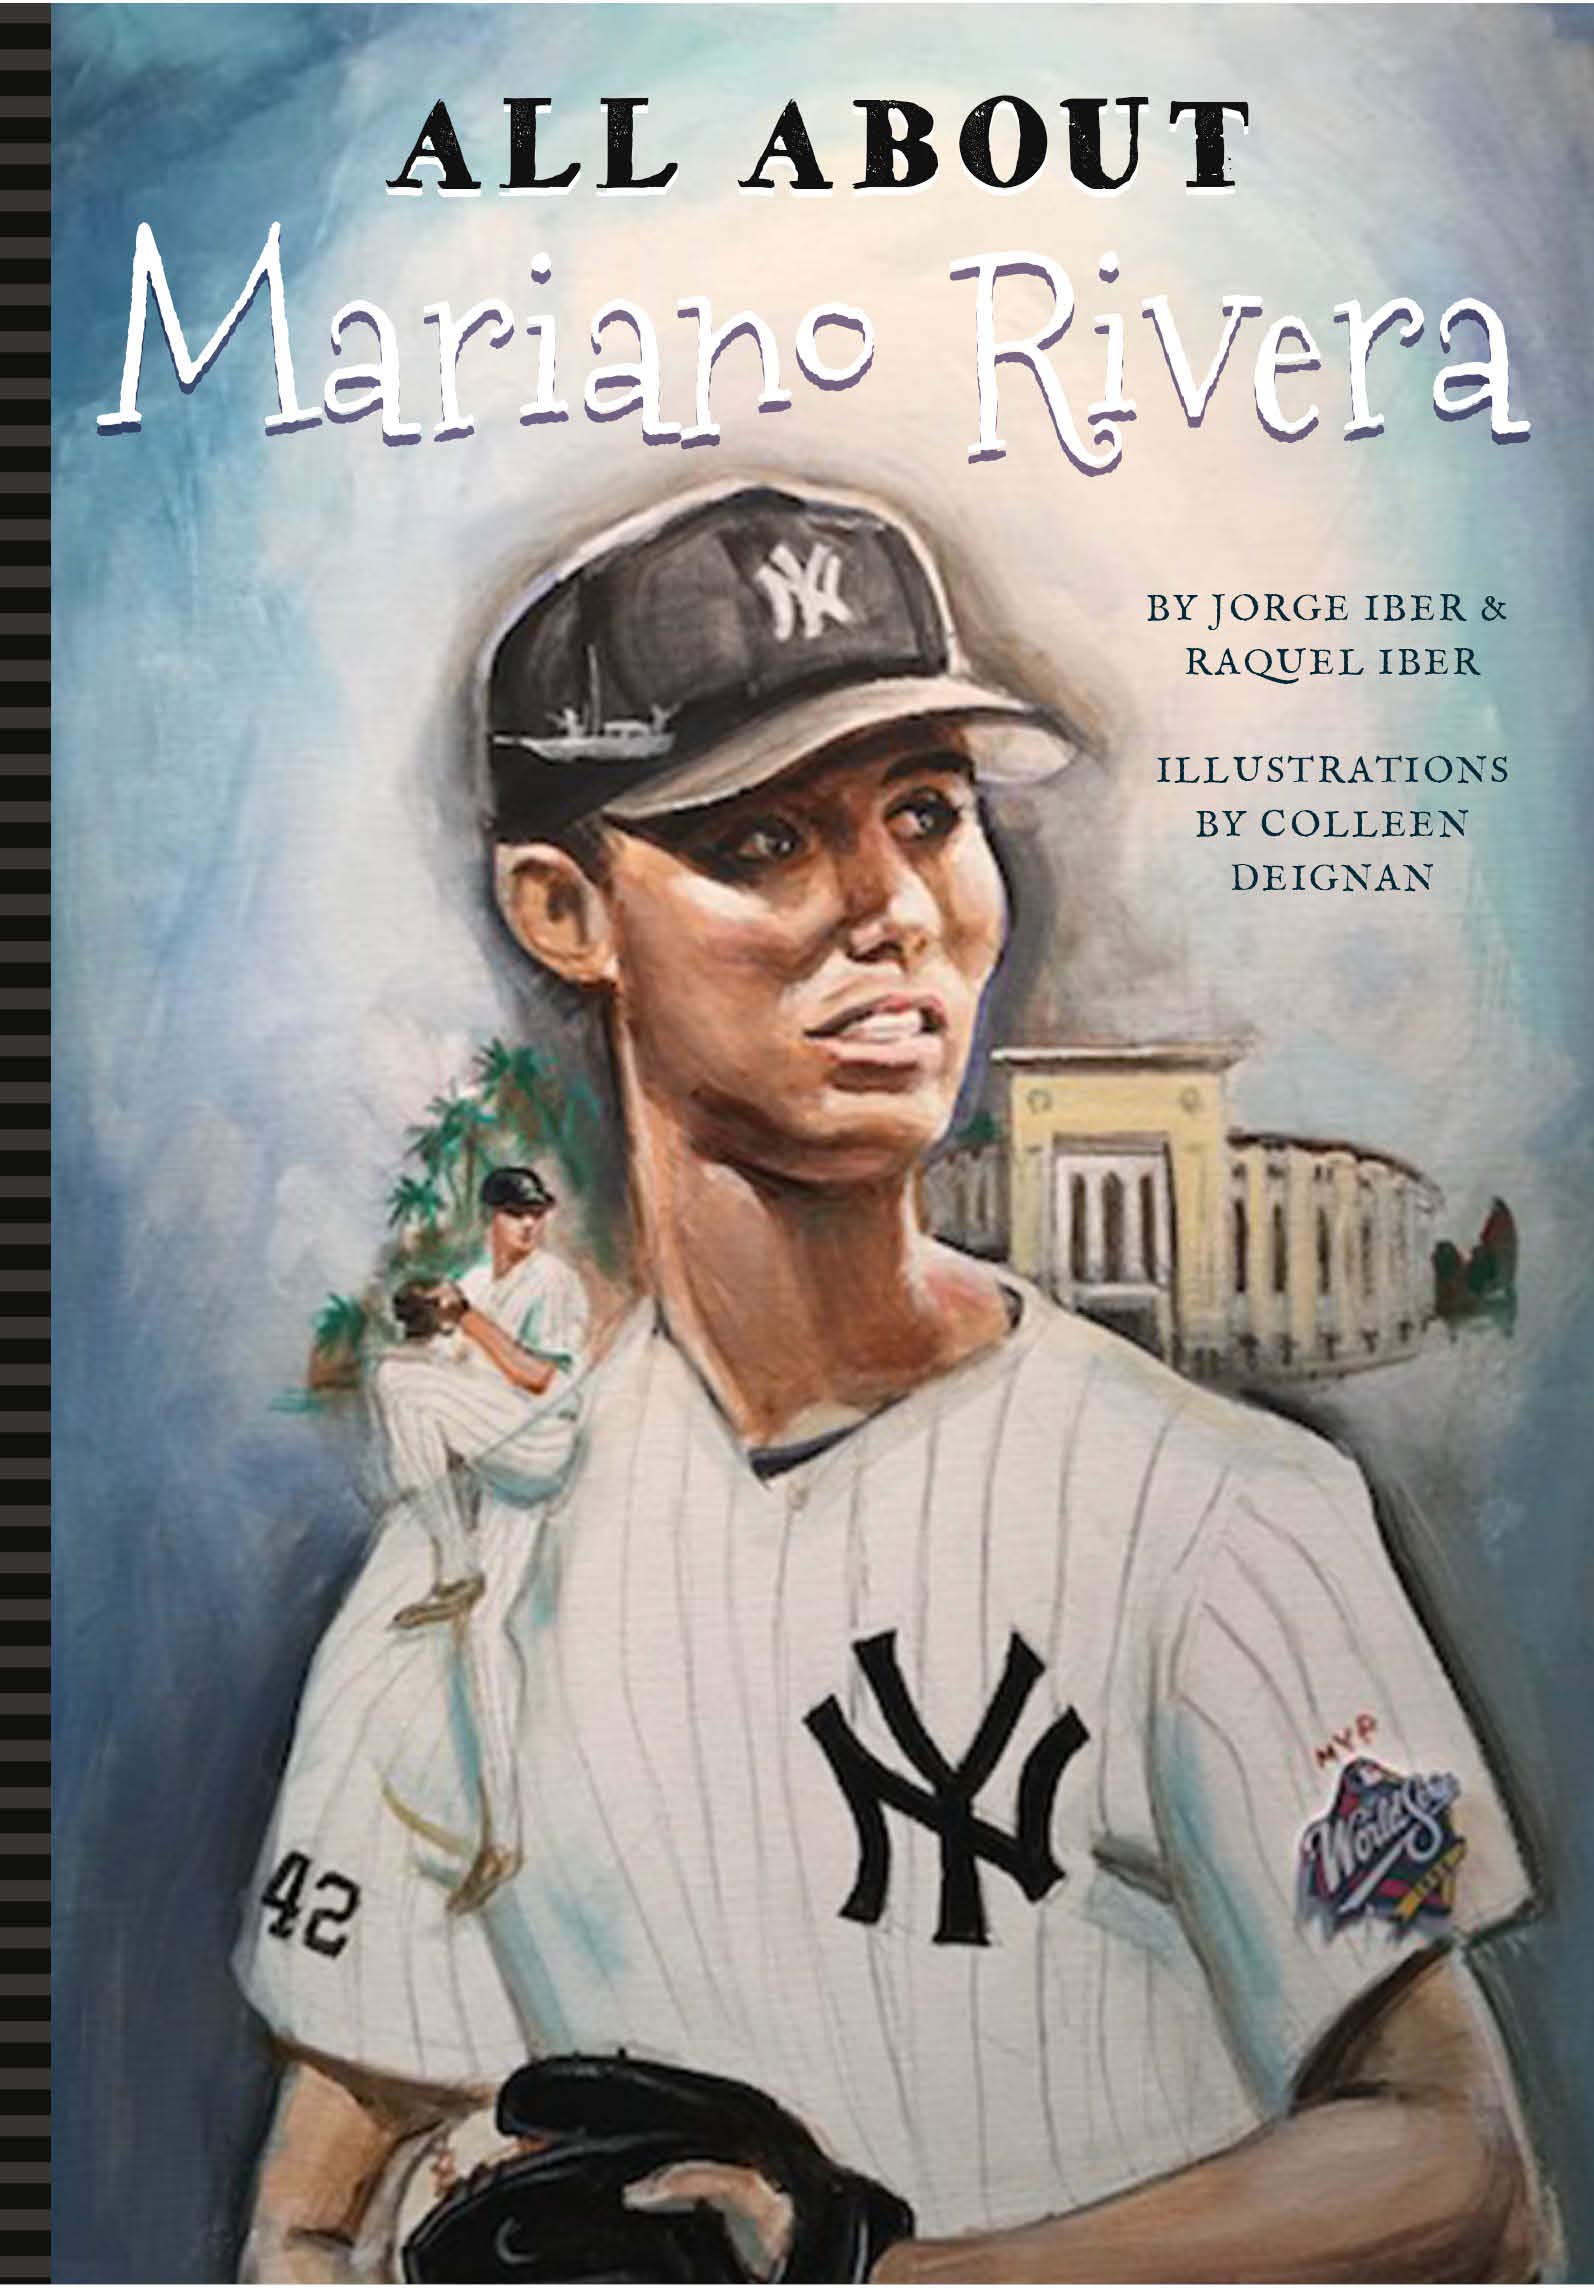 All About Mariano Rivera, book jacket